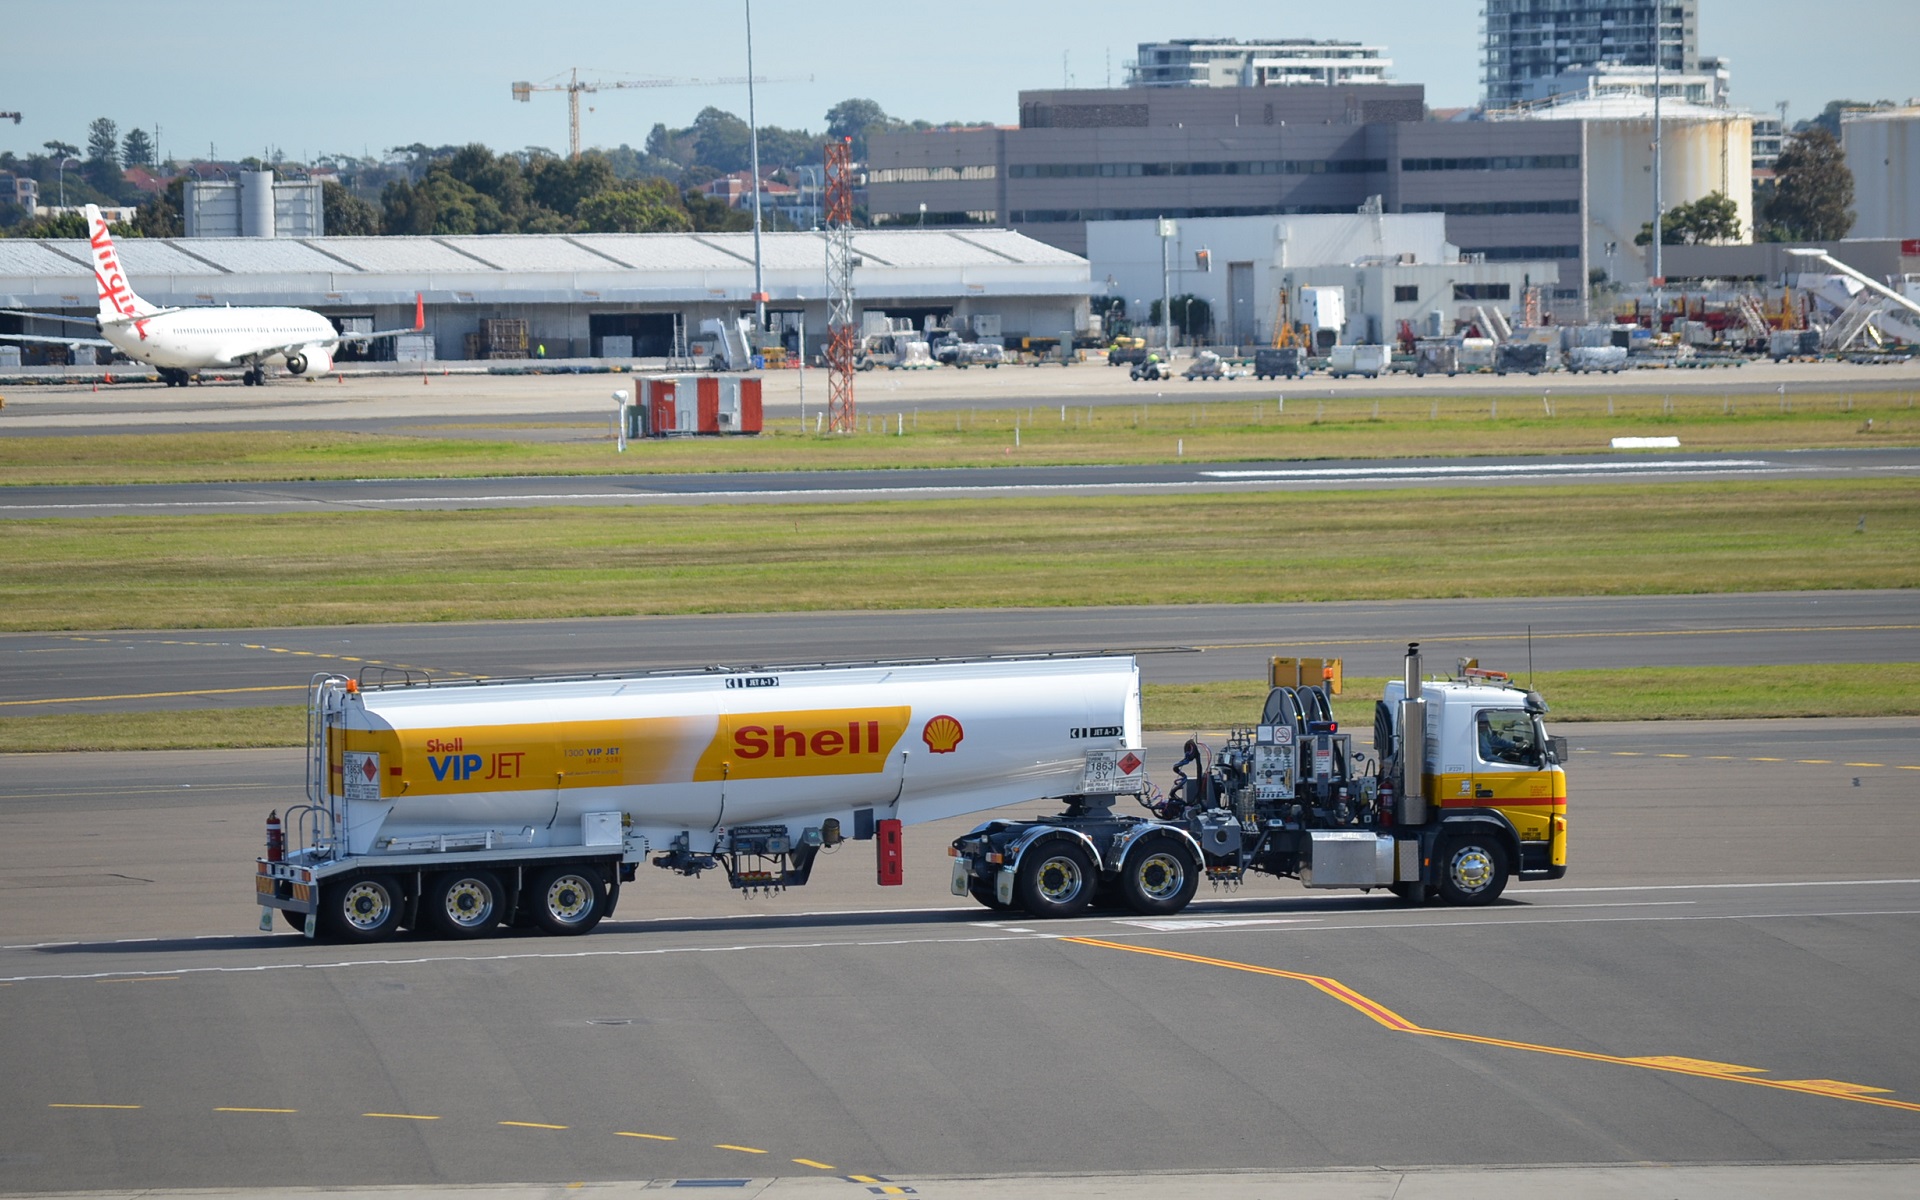 Shell VIP JET Tanker At Sydney Airport by lonewolf6738